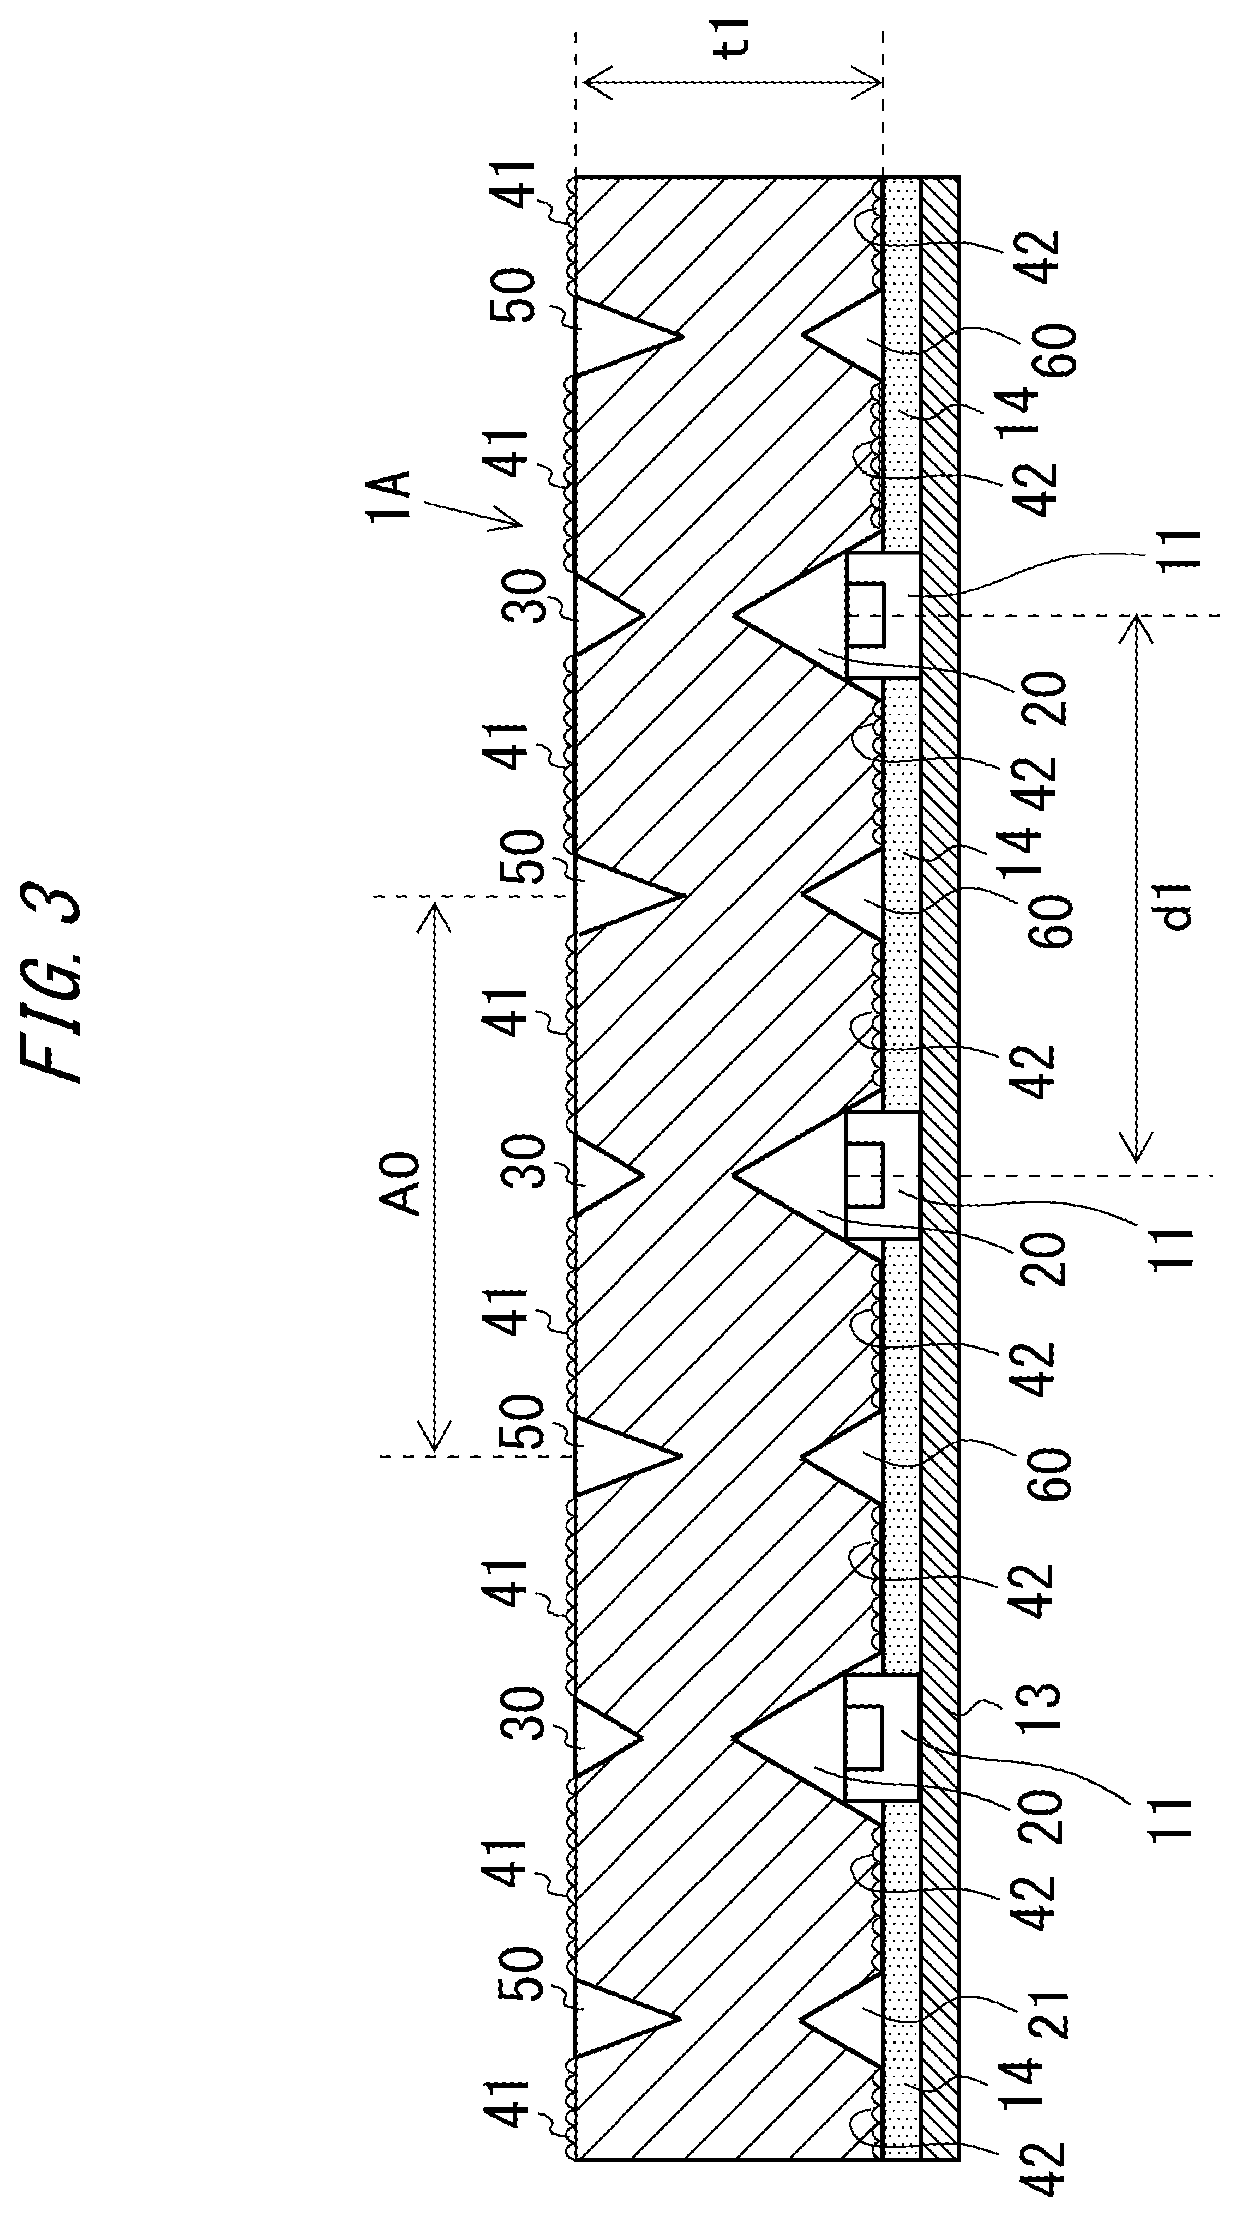 Light guide plate, planar light source apparatus, display apparatus, and electronic device